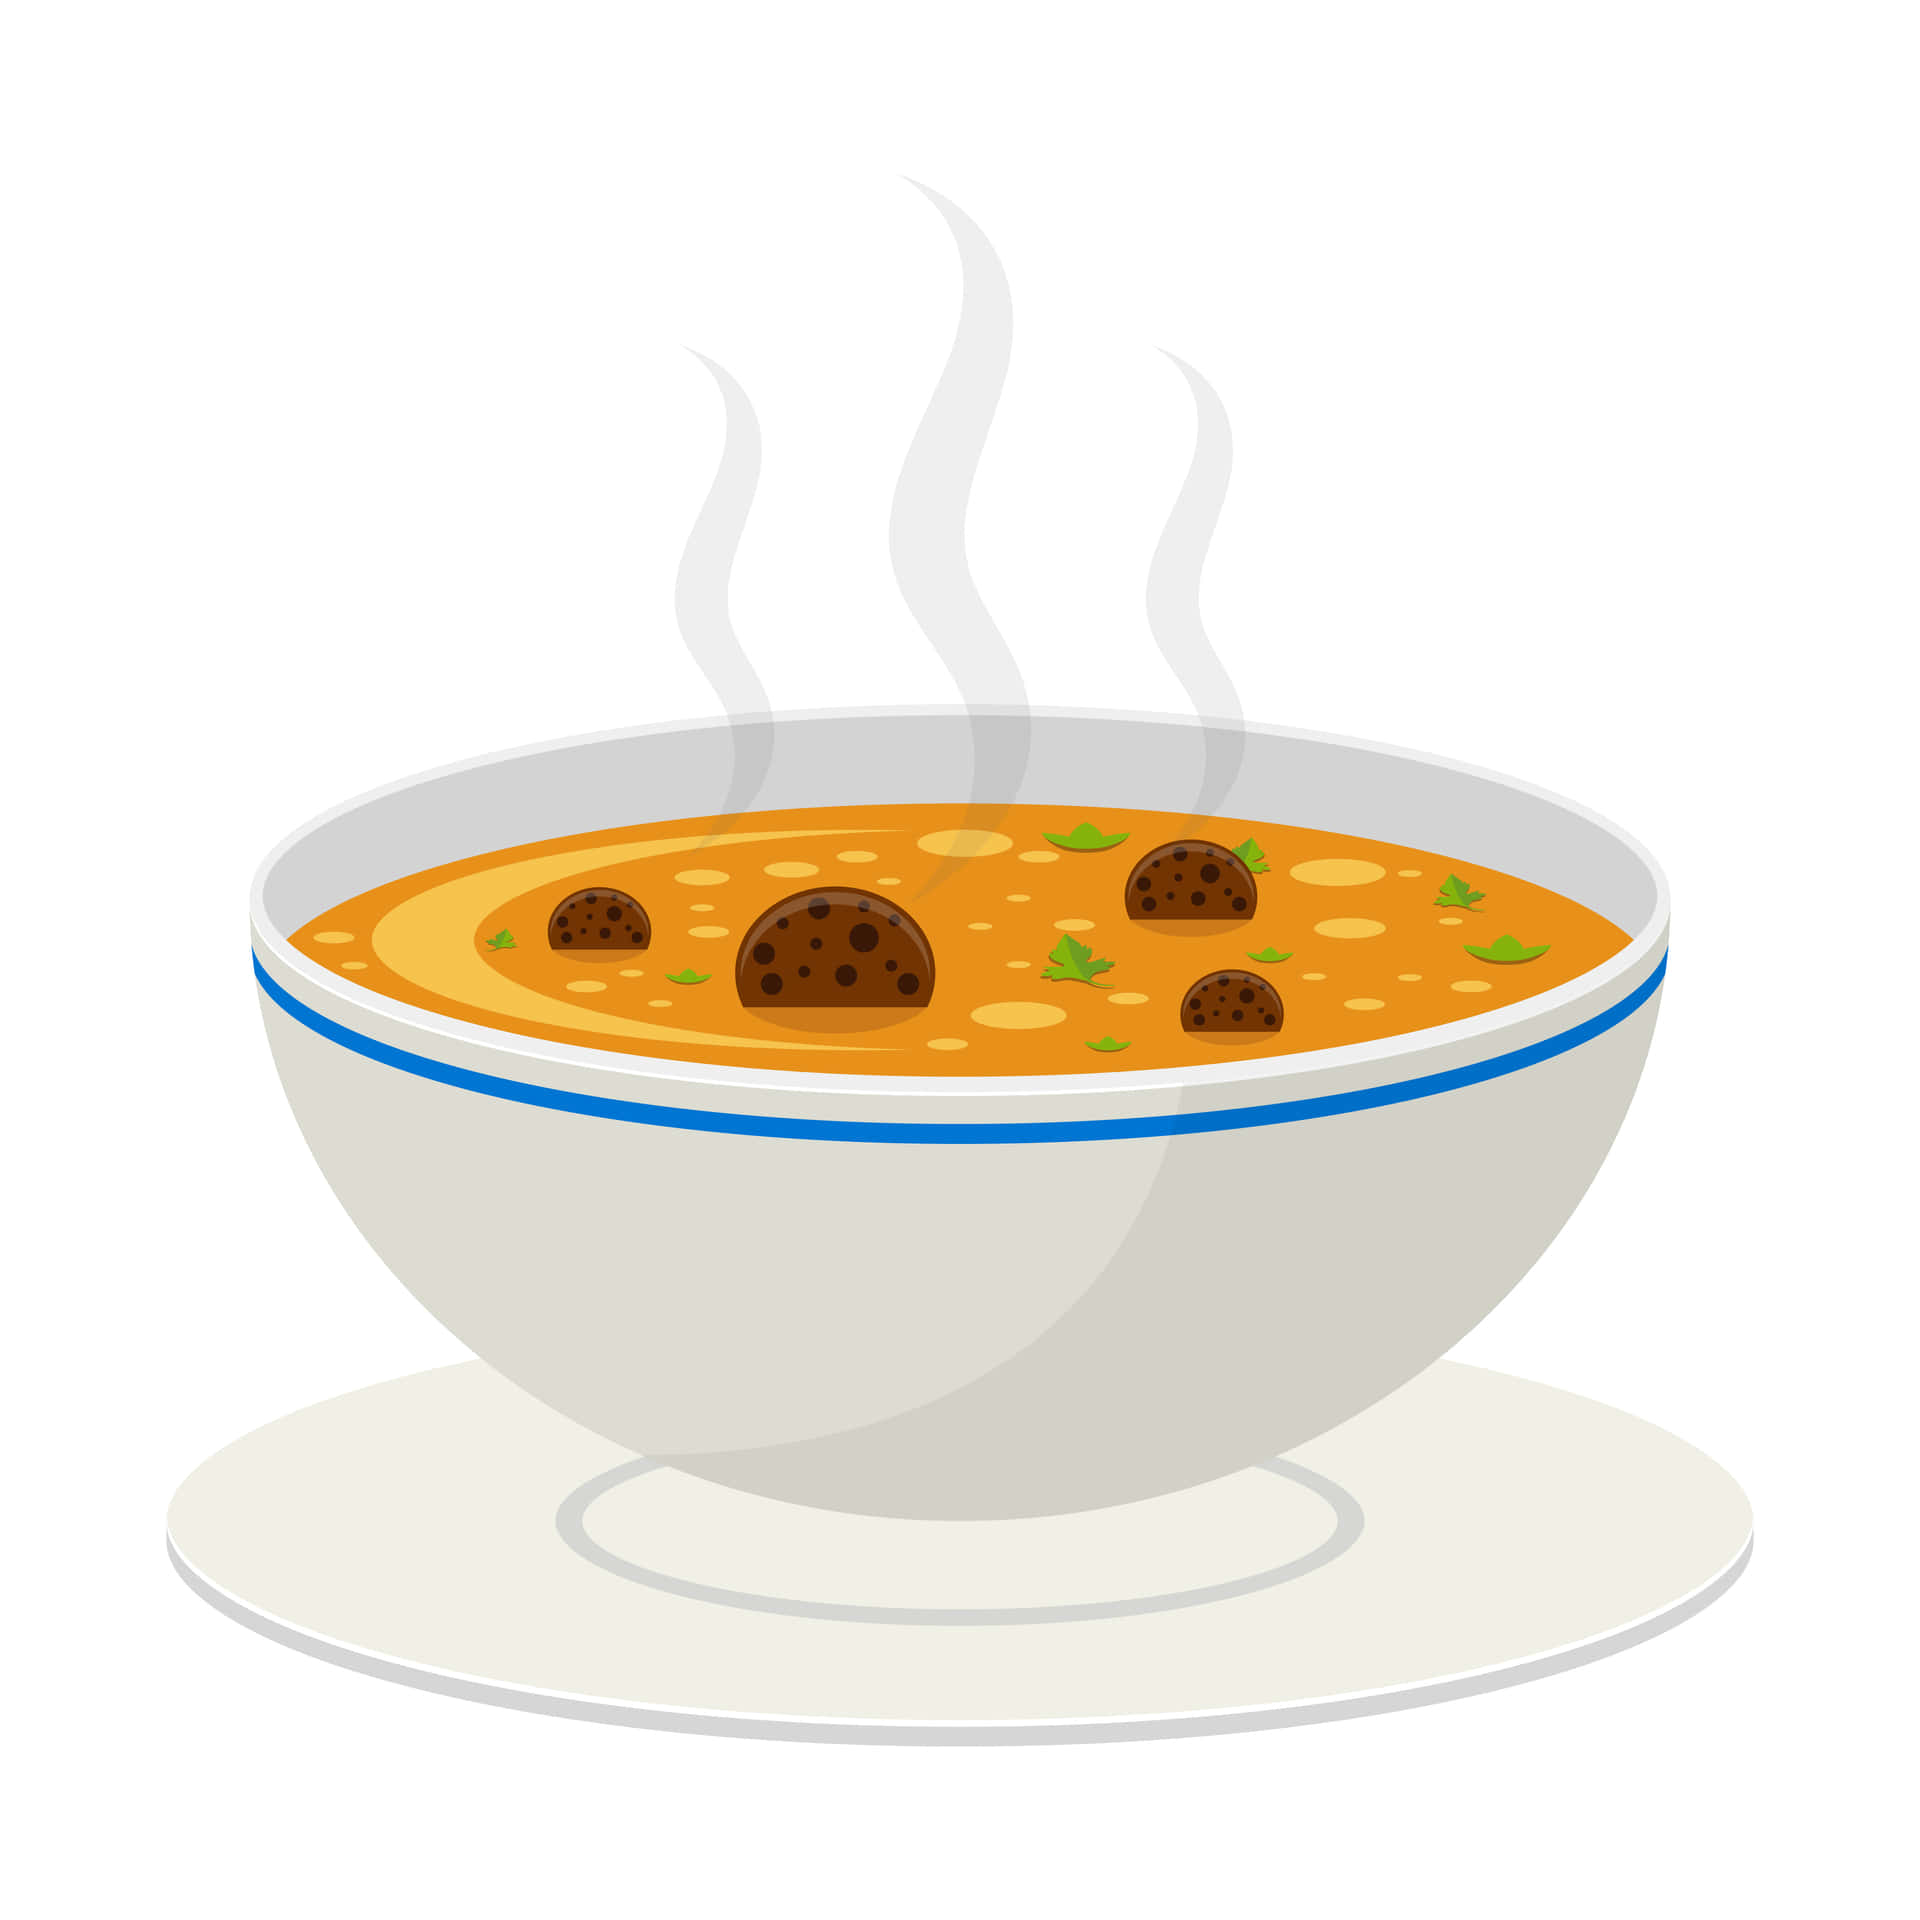 Enjoying a warm bowl of soup on a chilly day